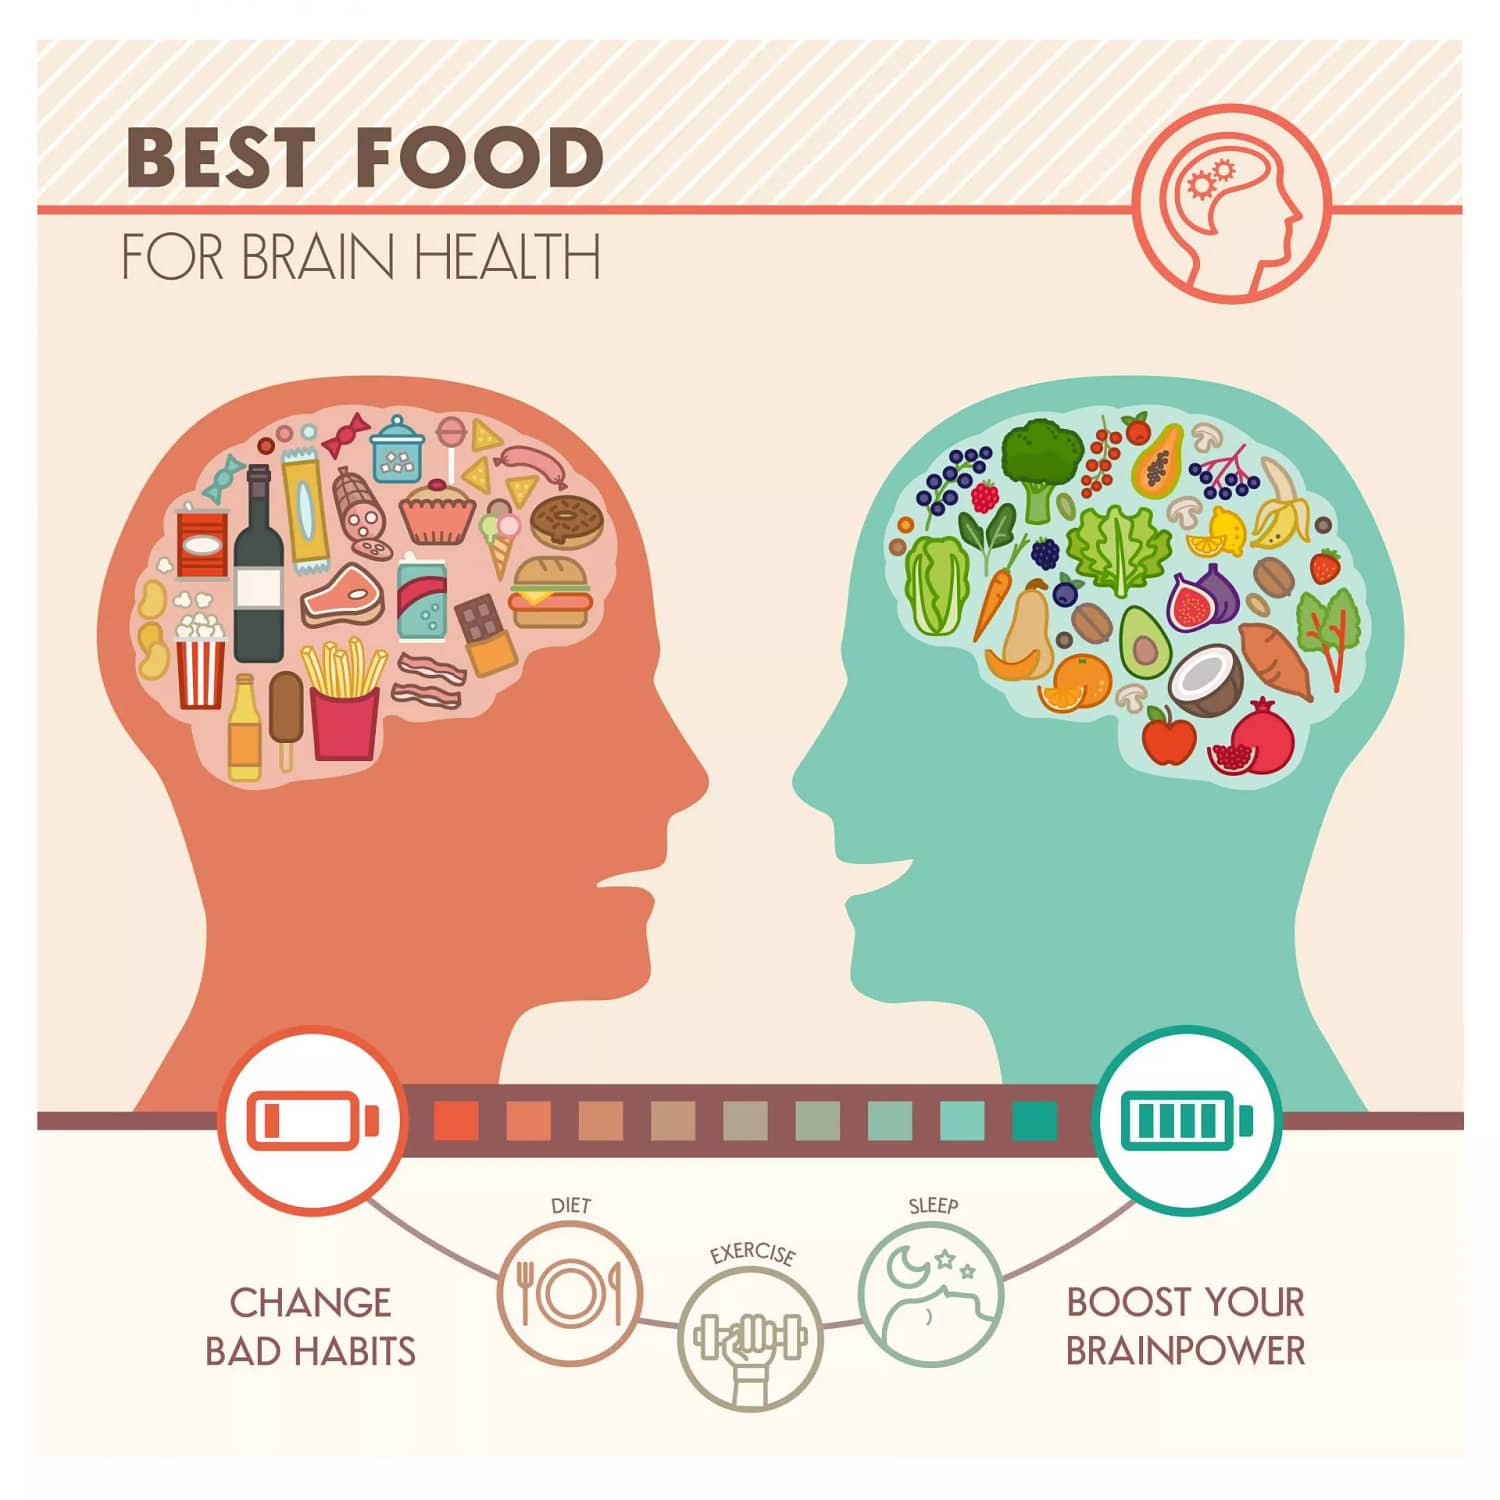 Best food for brain health infographic